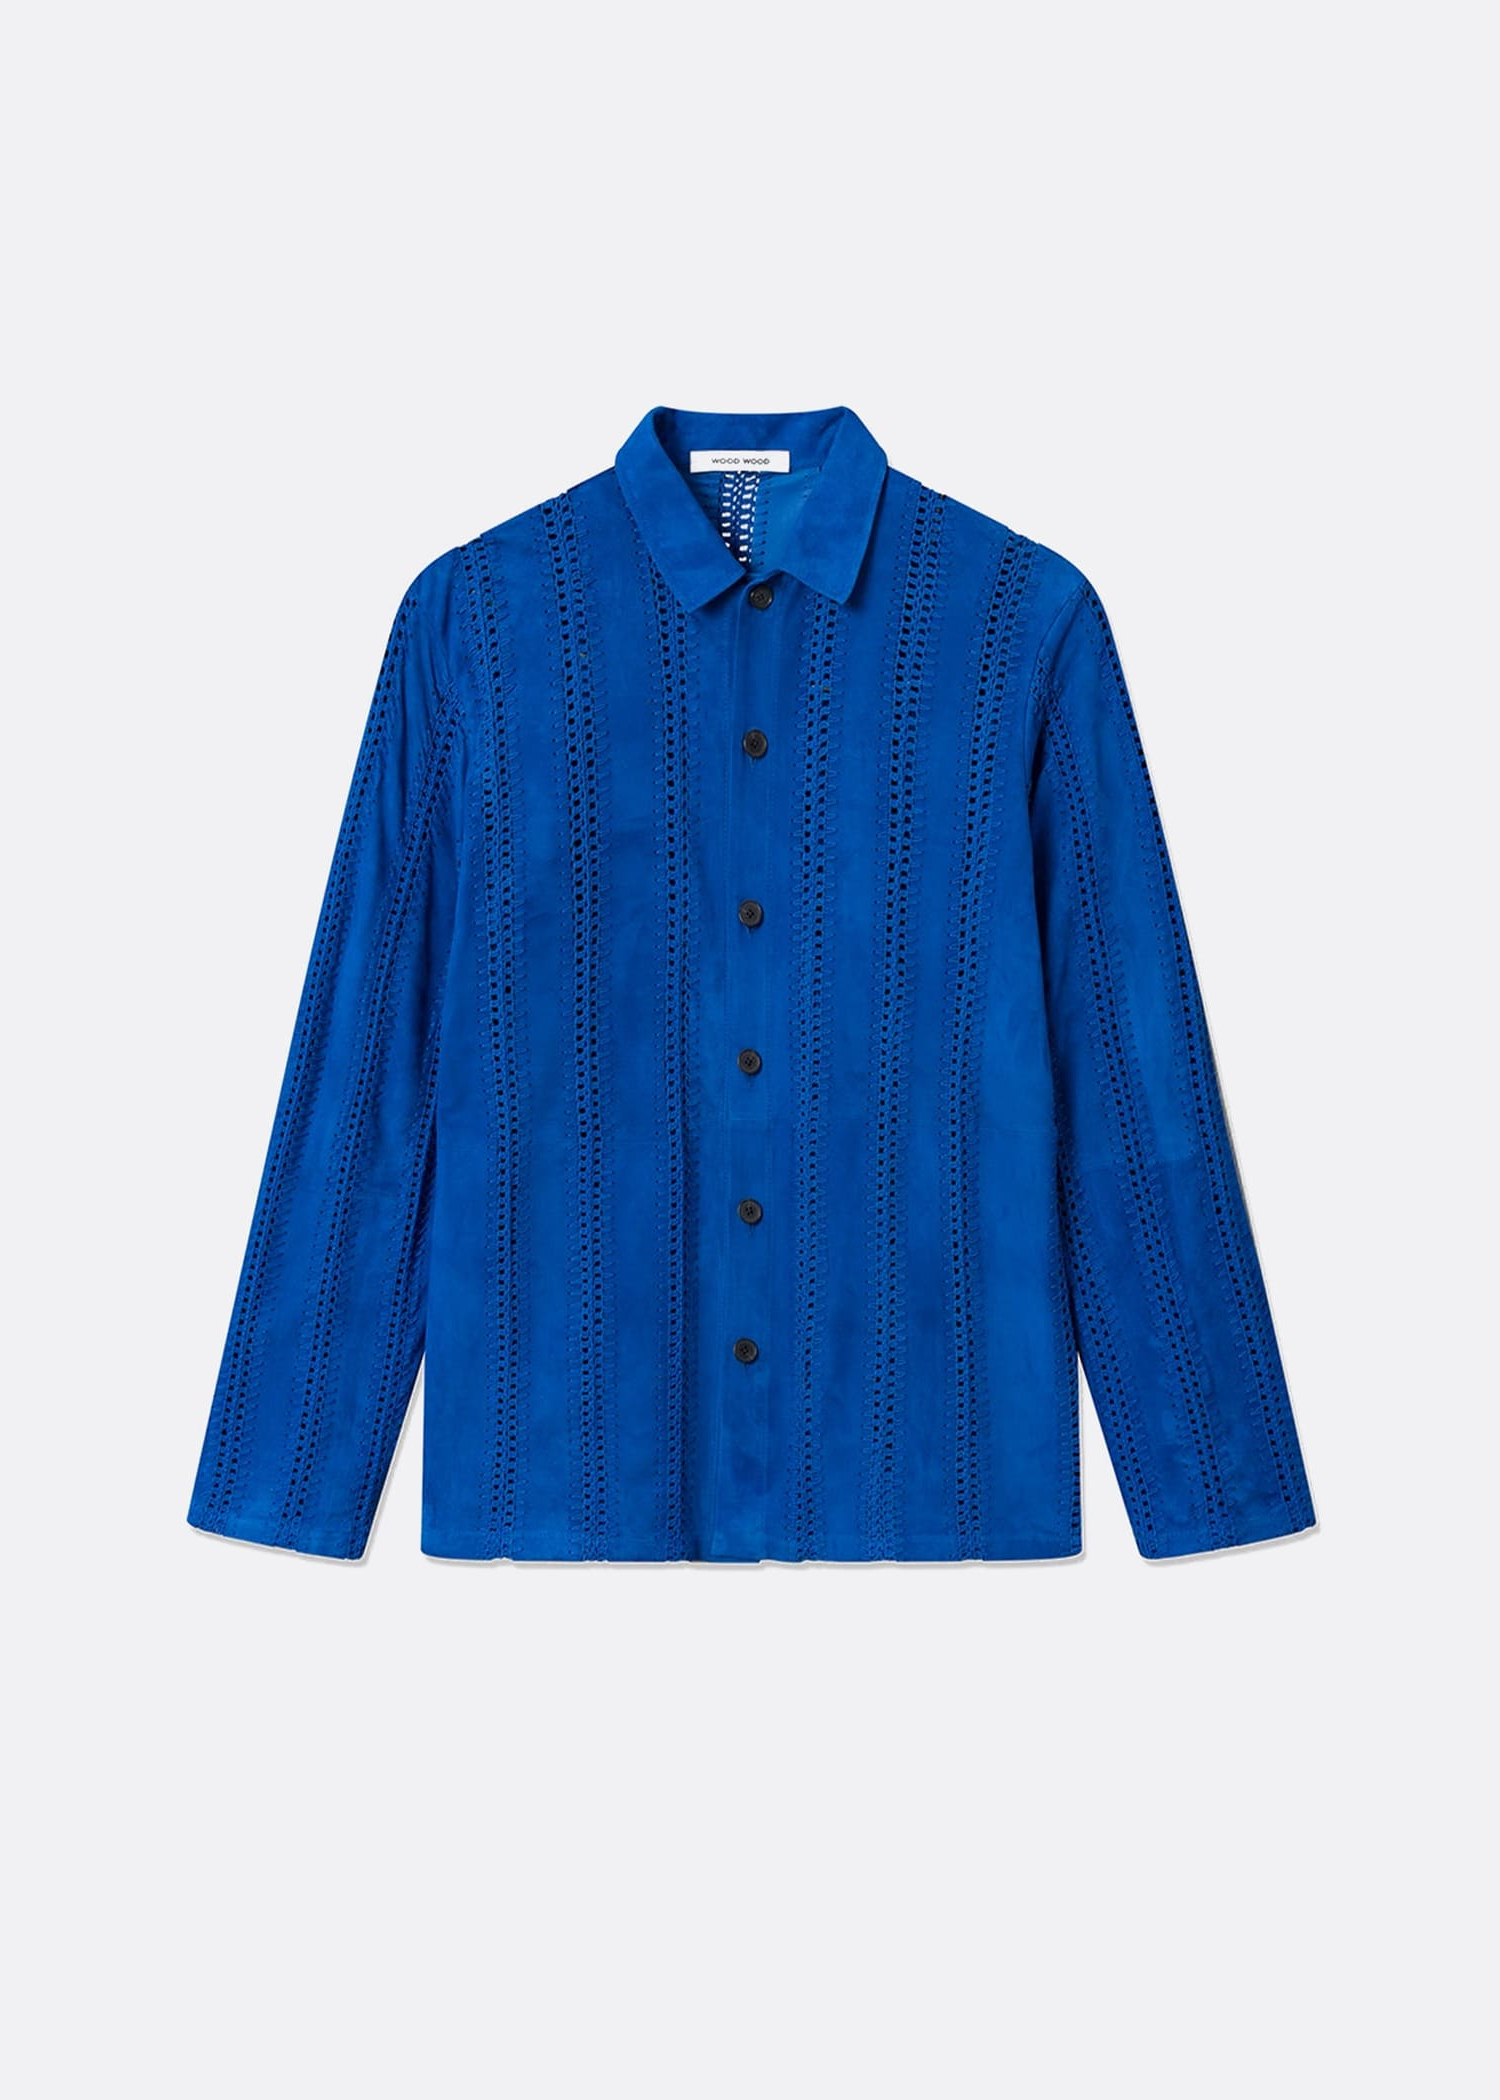 Wood Wood Clive suede crochet shirt